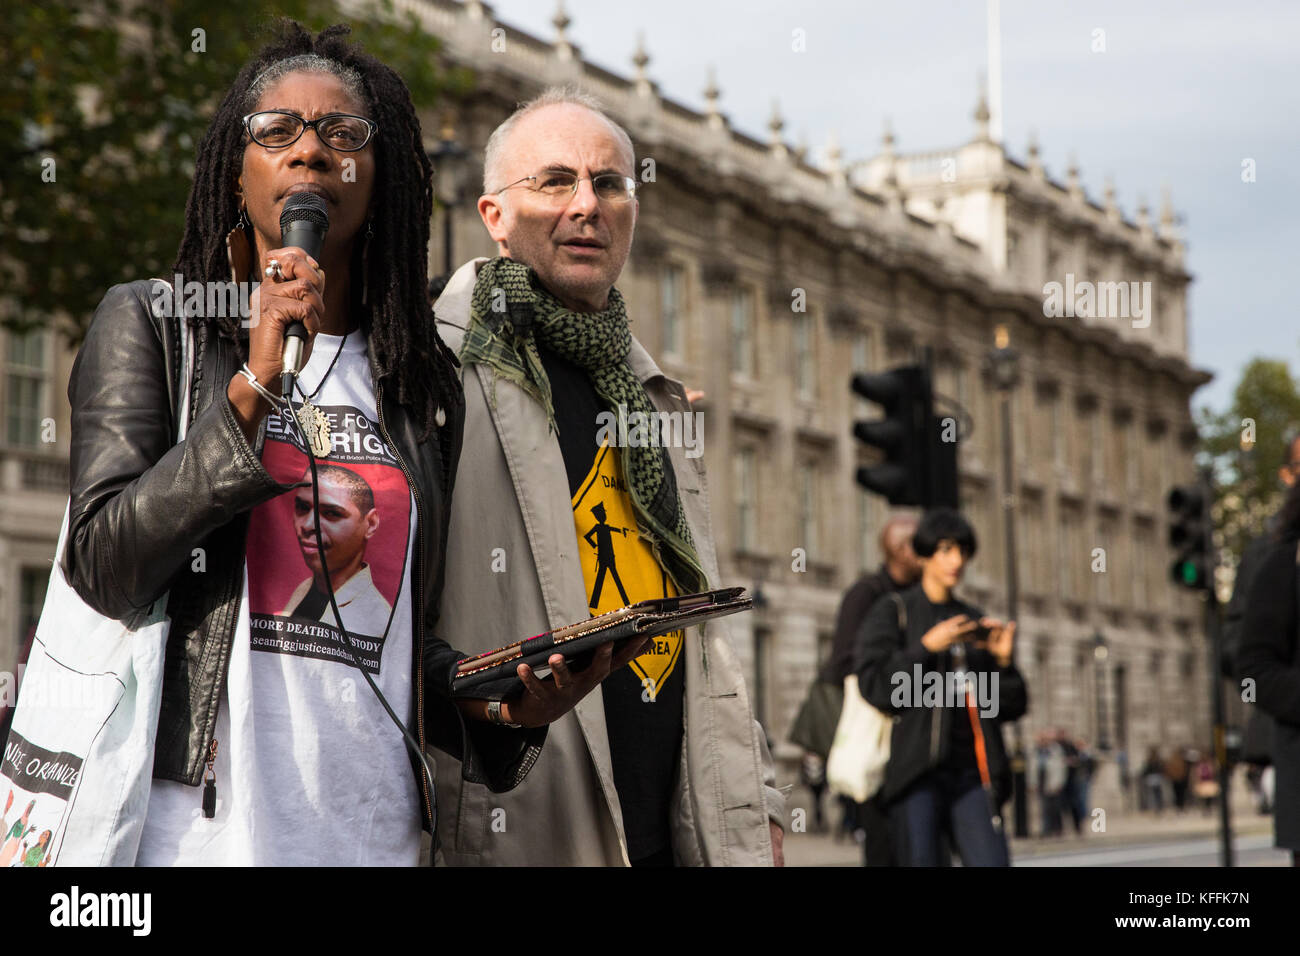 London, UK. 28th October, 2017. Marcia Rigg, sister of Sean Rigg, addresses campaigners from the United Families and Friends Campaign (UFFC) following their annual procession in remembrance of family members and friends who died in police custody, prison, immigration detention or secure psychiatric hospitals. Sean Rigg, 40, died on 21st August 2008 while in police custody at Brixton police station. Credit: Mark Kerrison/Alamy Live News Stock Photo